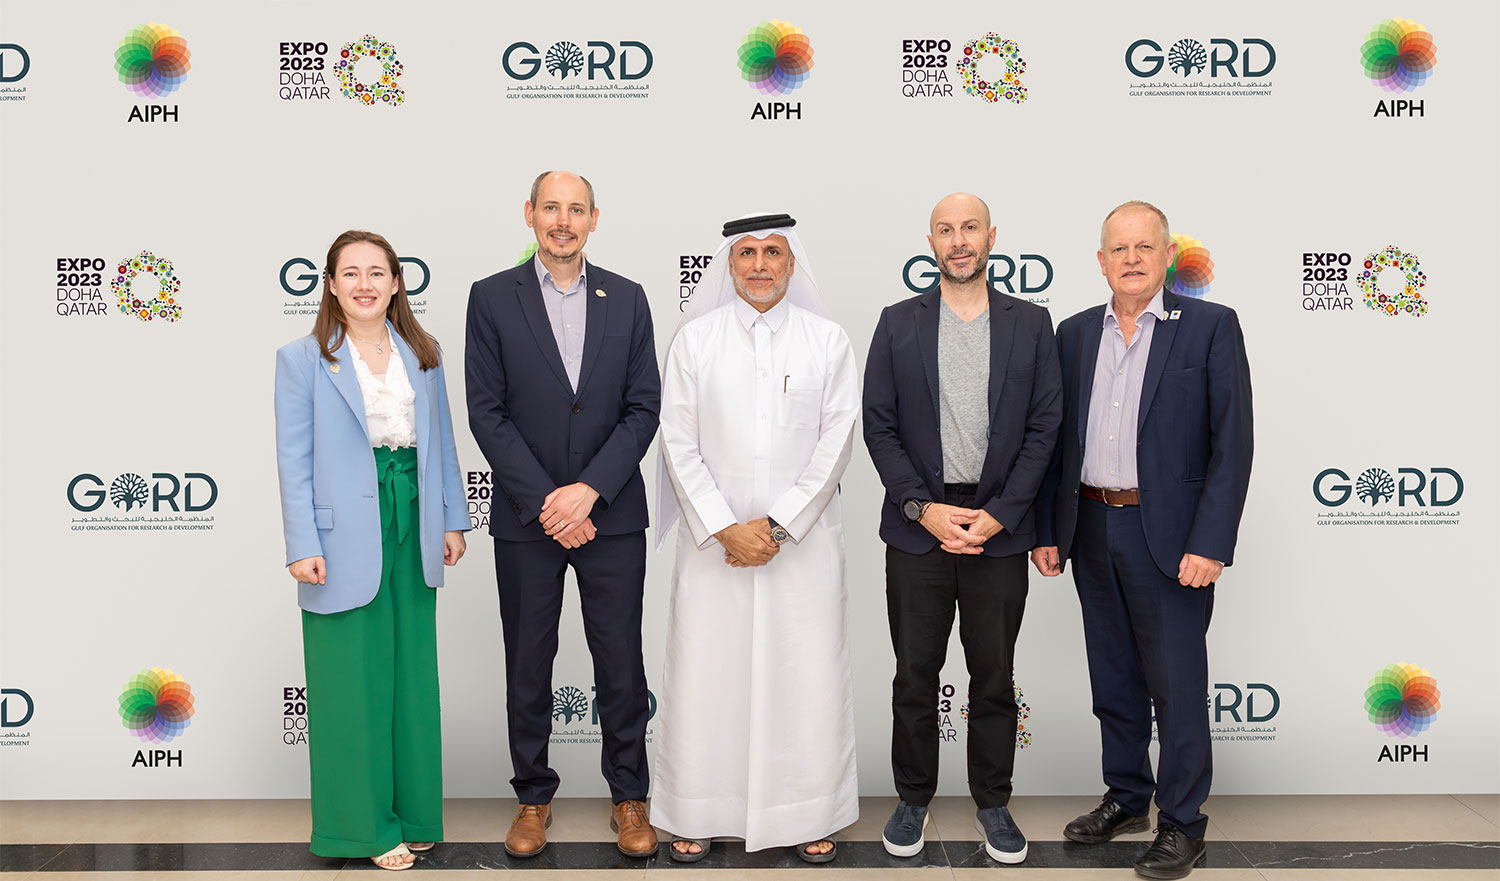 AIPH delegation visits GORD to discuss Expo 2023 sustainability progress